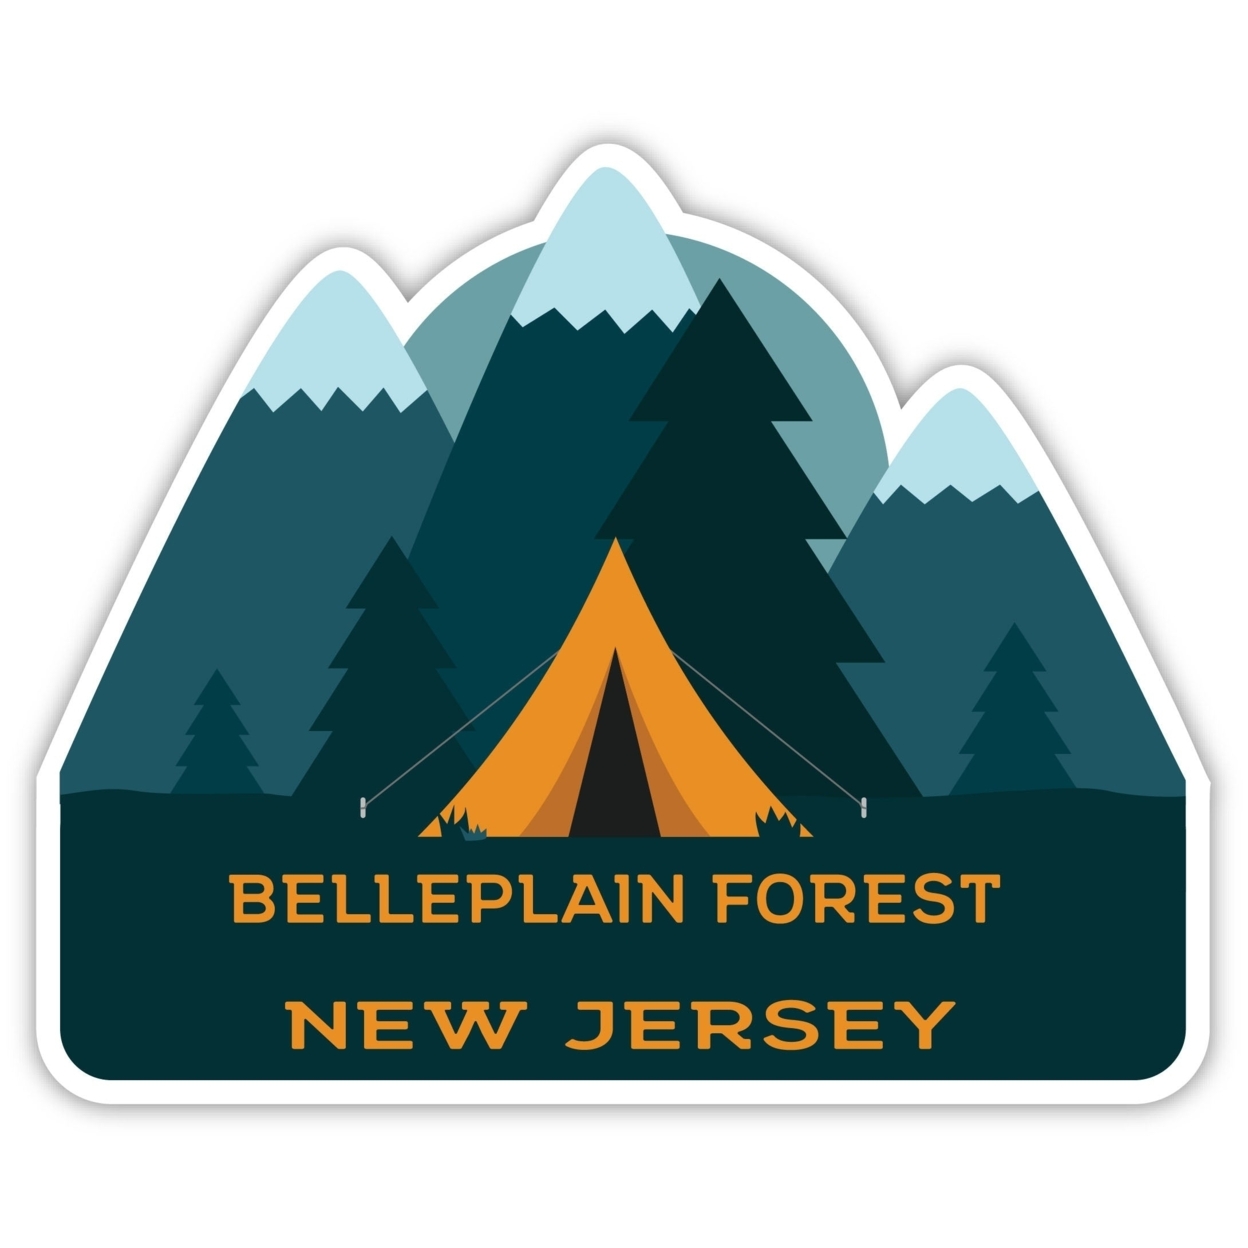 Belleplain Forest New Jersey Souvenir Decorative Stickers (Choose Theme And Size) - 4-Pack, 2-Inch, Tent